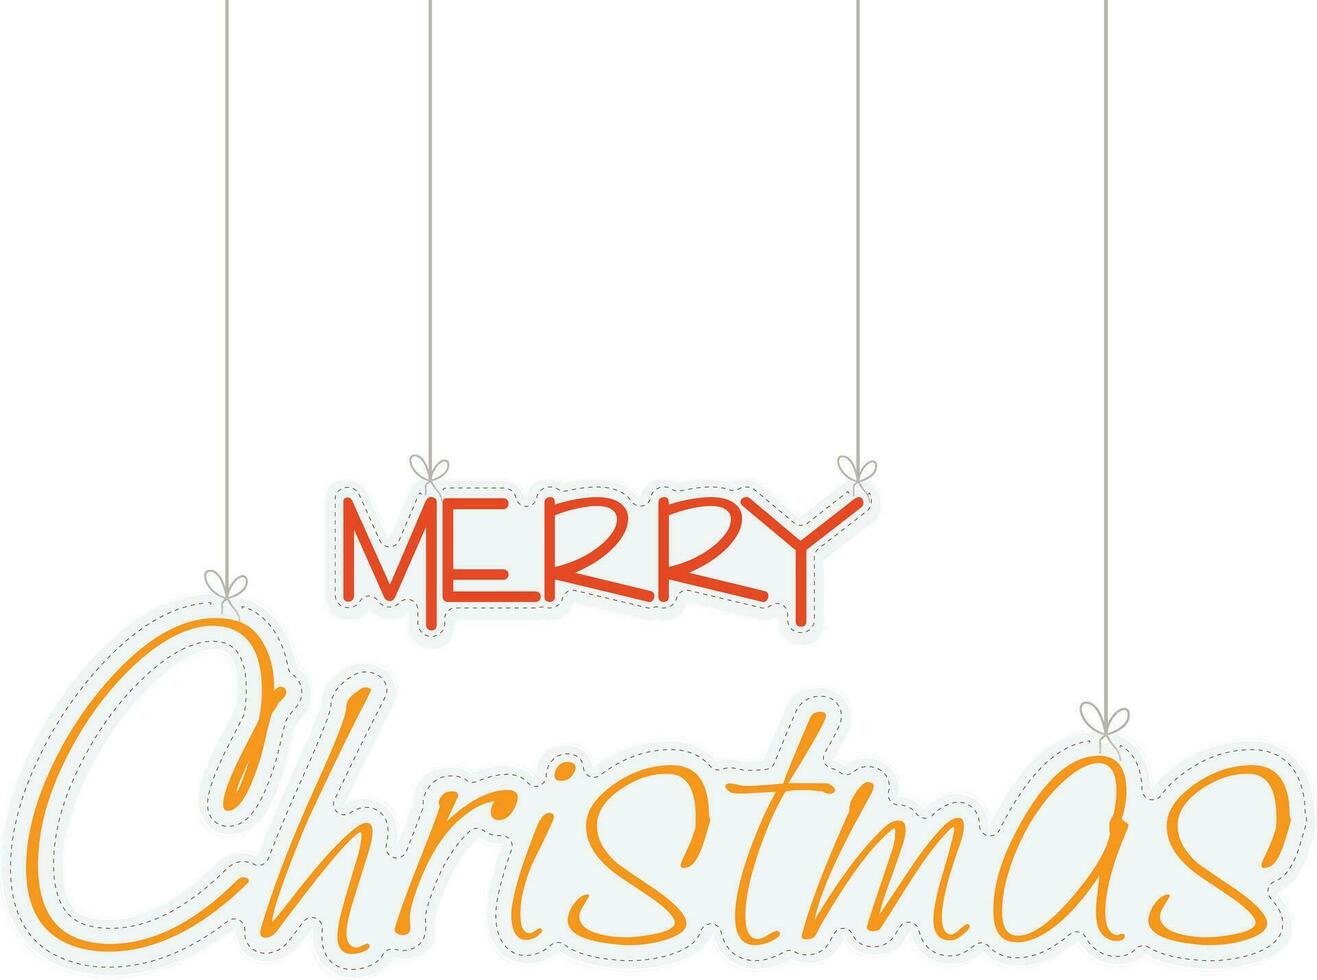 Hanging paper text Merry Christmas for celebration. vector